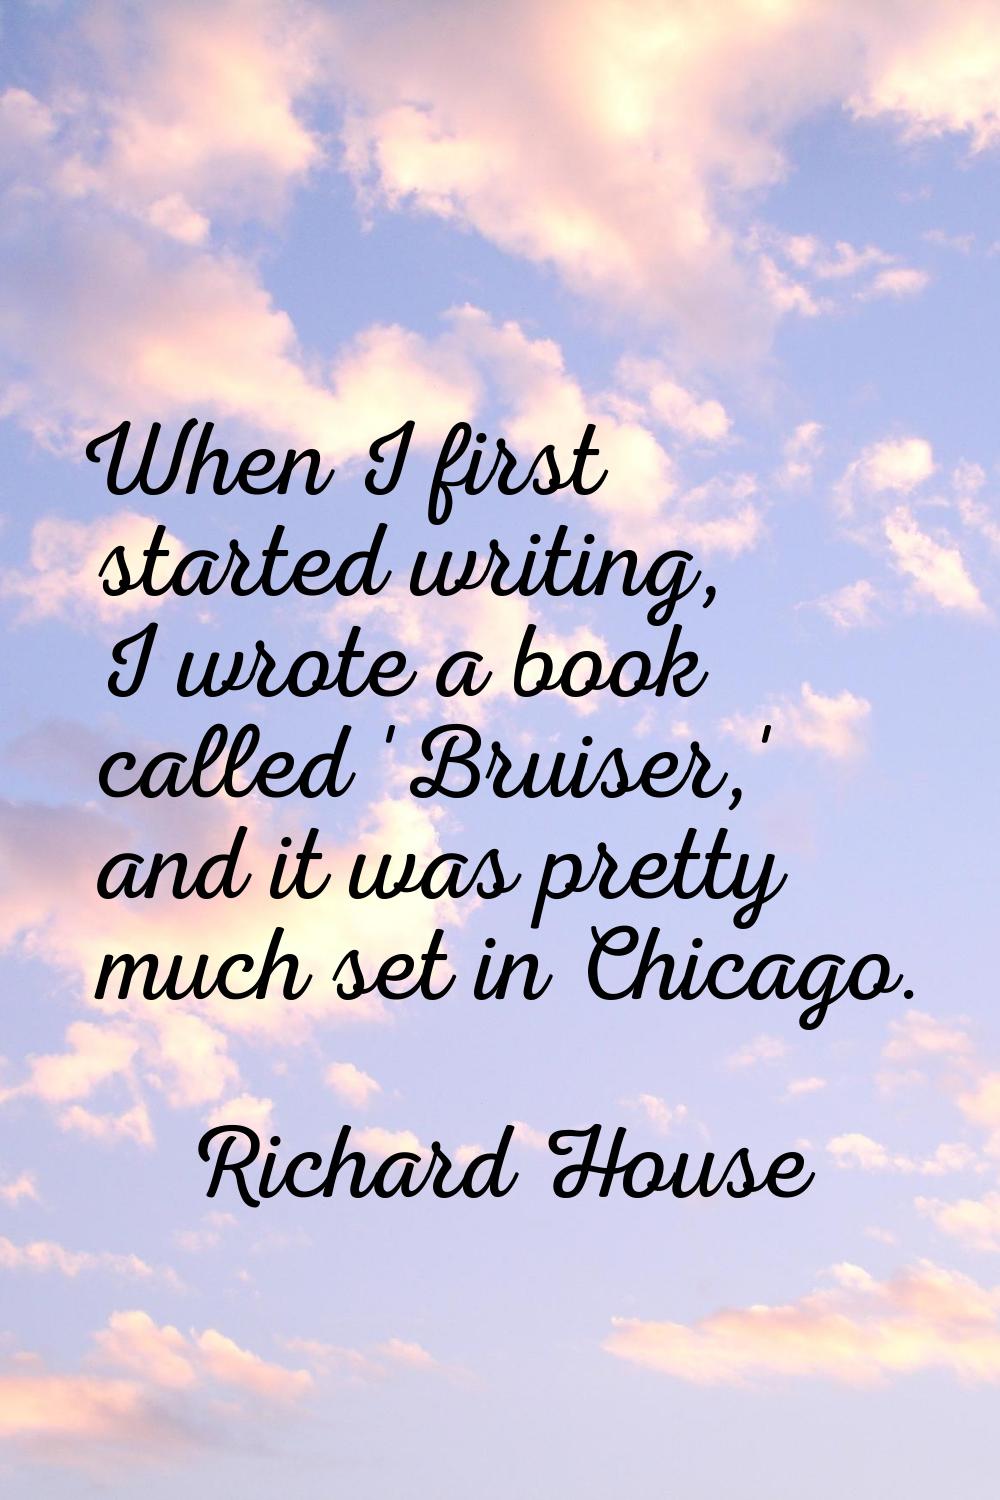 When I first started writing, I wrote a book called 'Bruiser,' and it was pretty much set in Chicag